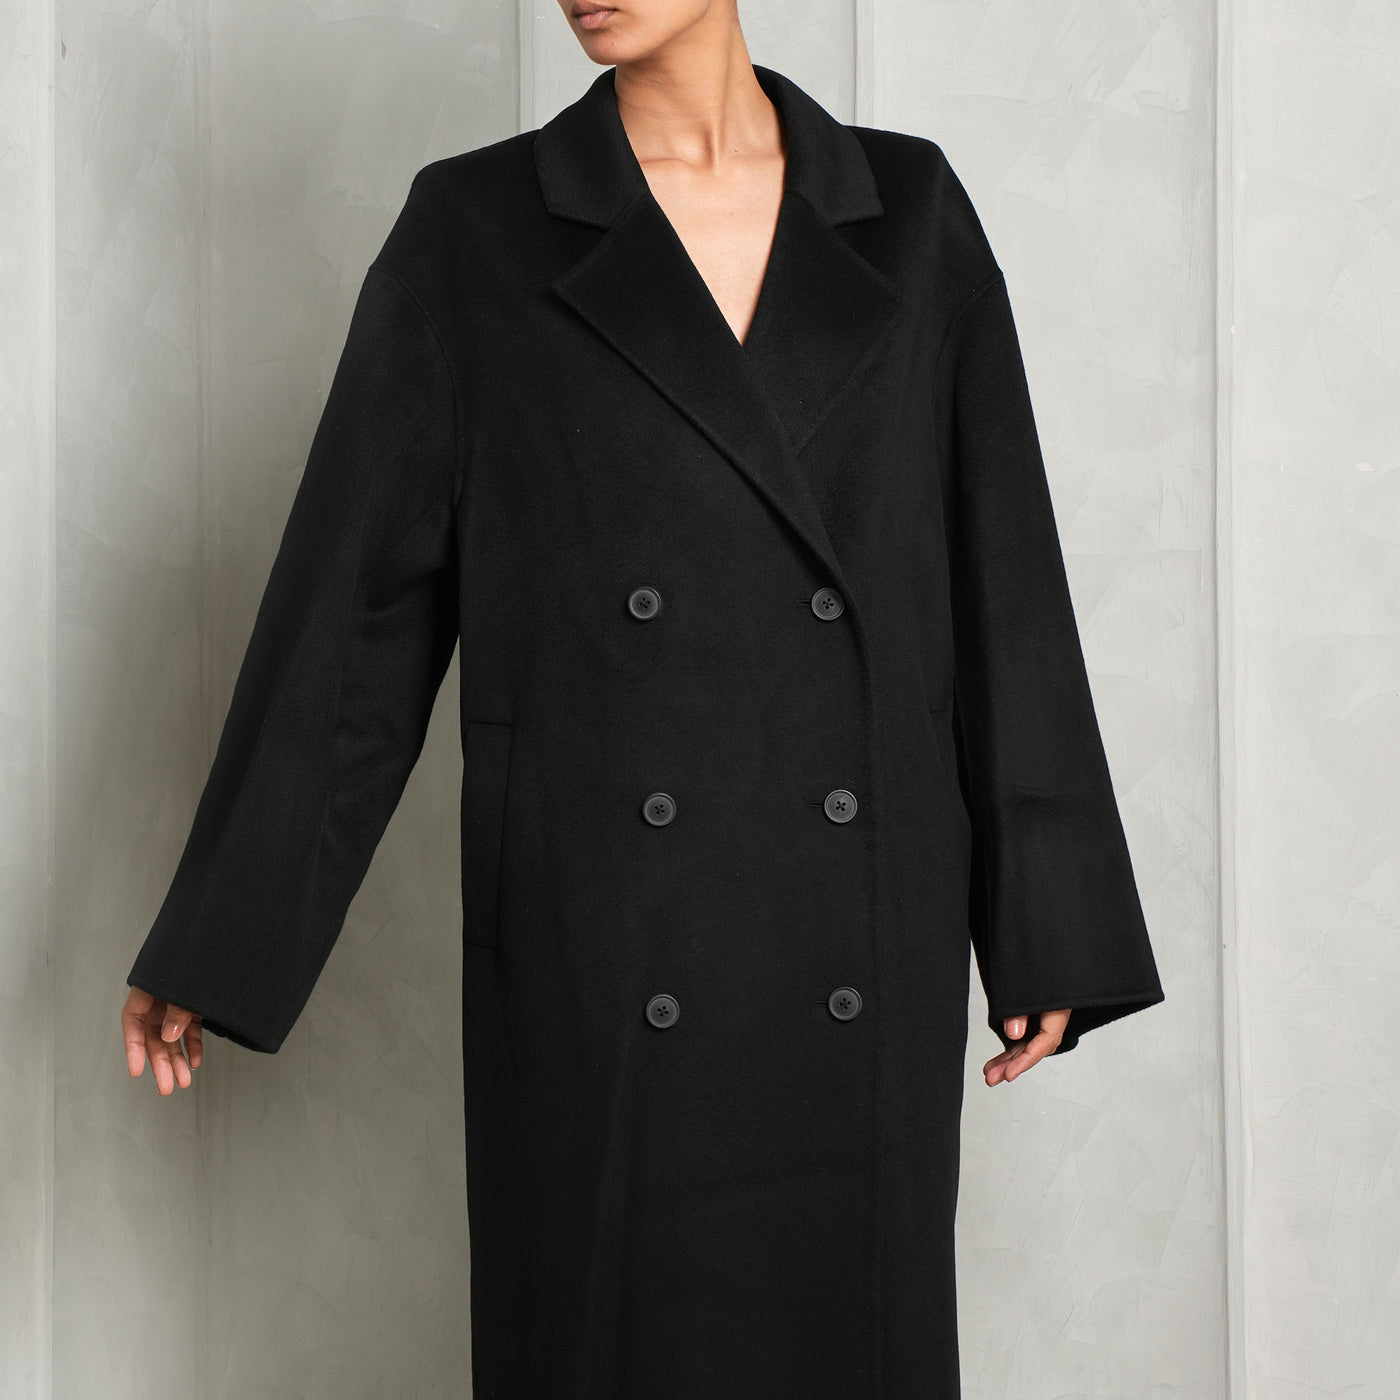 LOULOU STUDIO double breasted wool coat